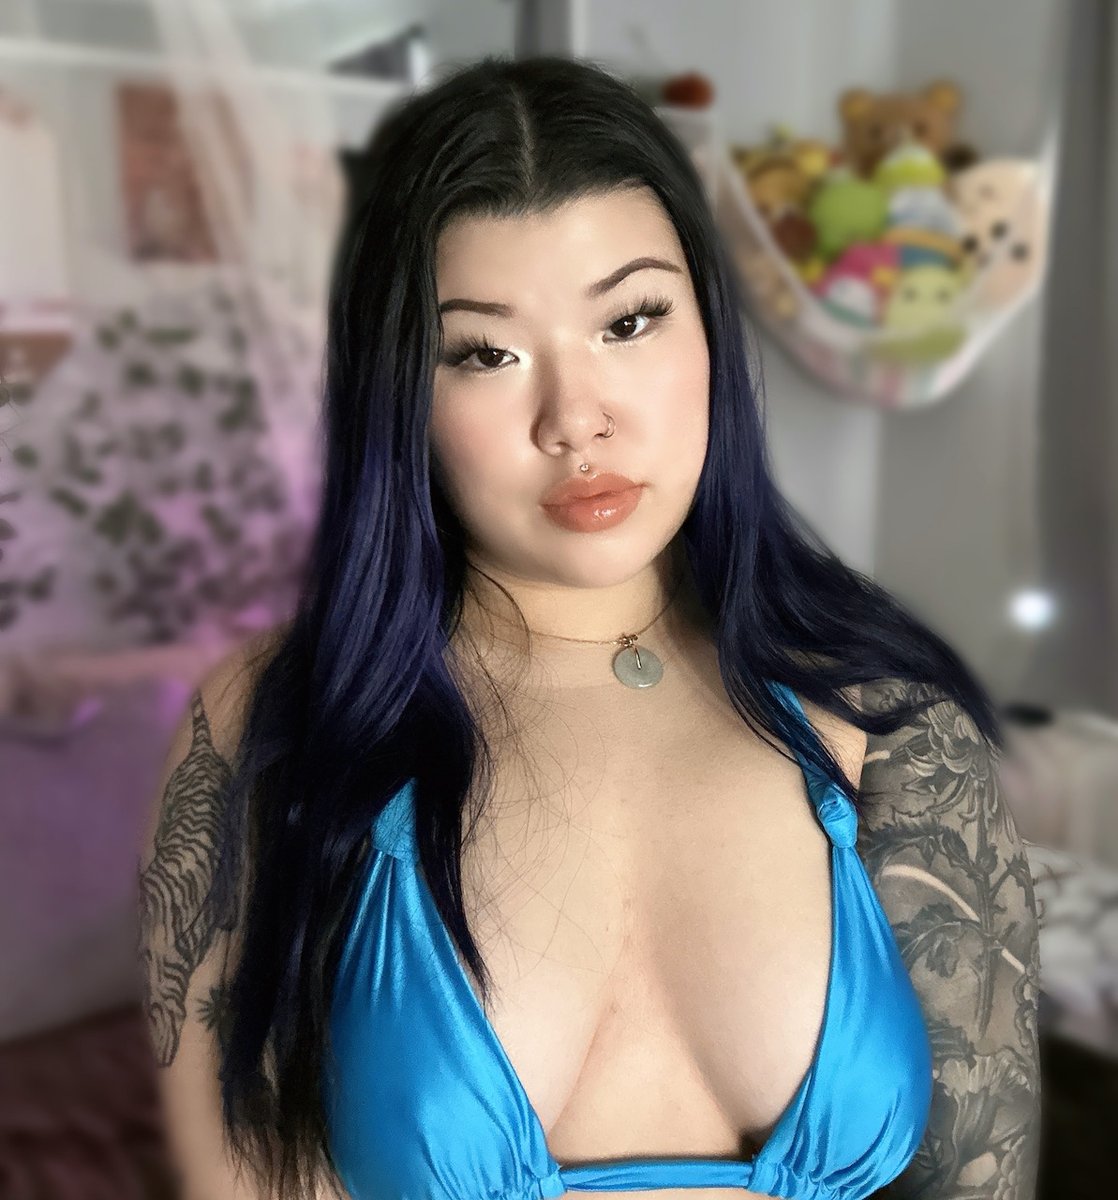 Hoping for an extended weekend with @restrialterre. #Streamate #StreamateModel #tattoos #inkedbabe #beauty #hot #sexy @stream_fans loom.ly/vP5Kocs